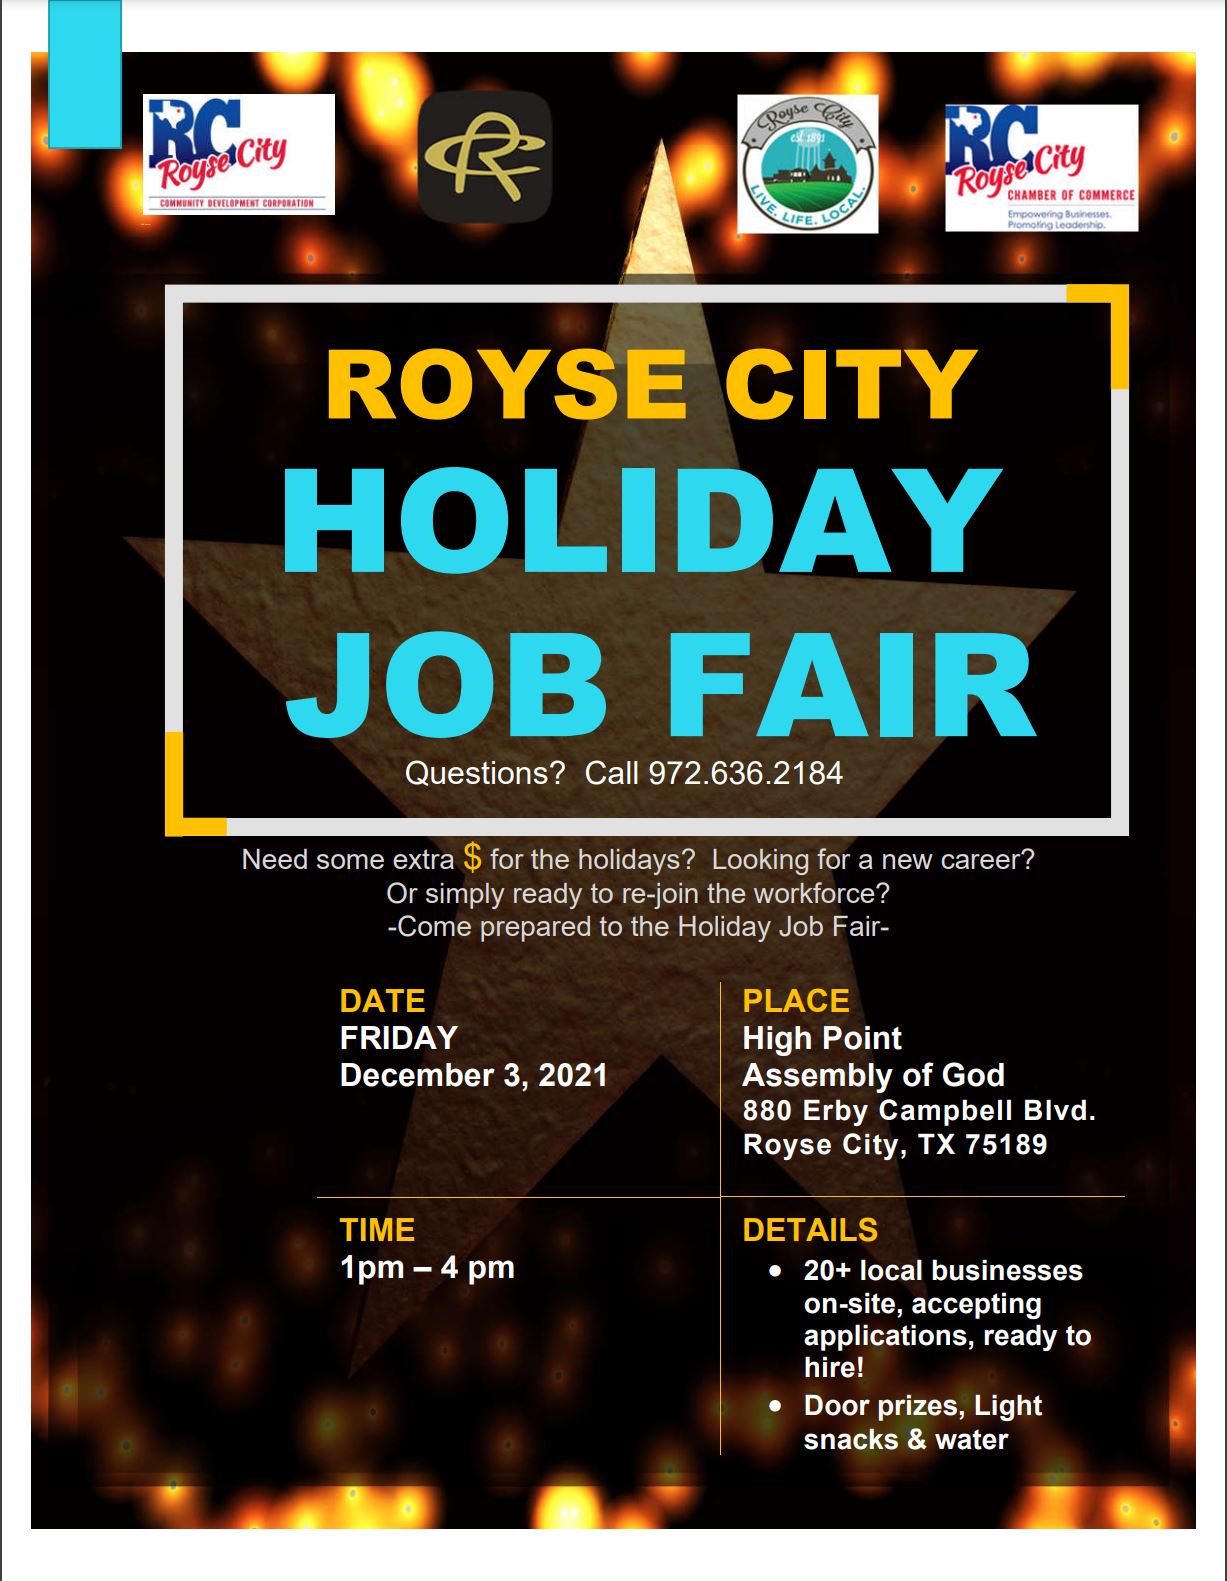 Find Your Perfect Career at the Royse City Holiday Job Fair on December 3rd! Photo